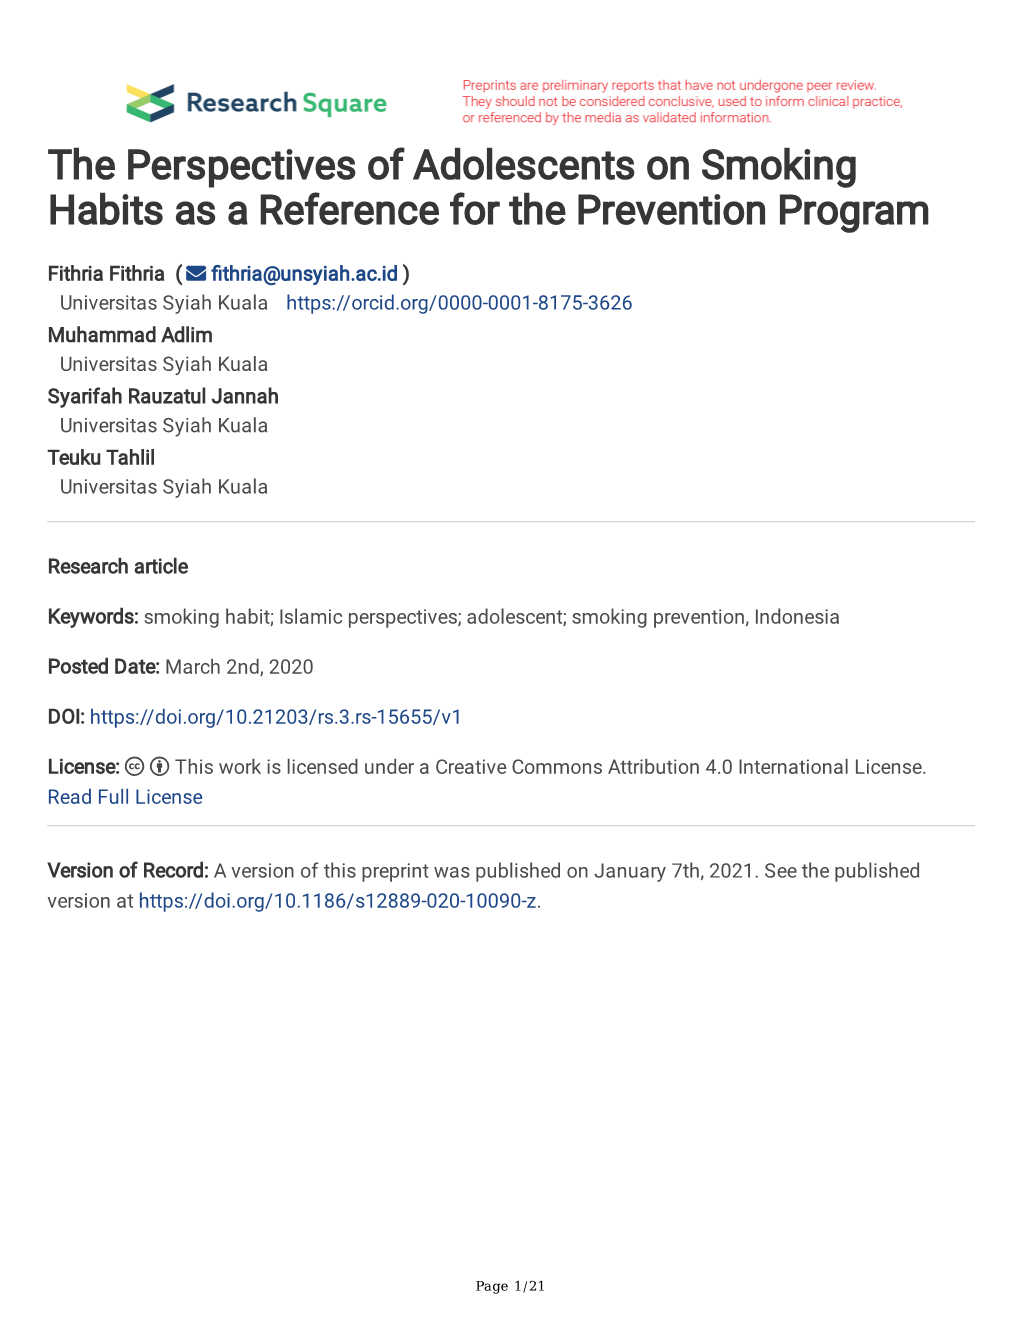 The Perspectives of Adolescents on Smoking Habits As a Reference for the Prevention Program